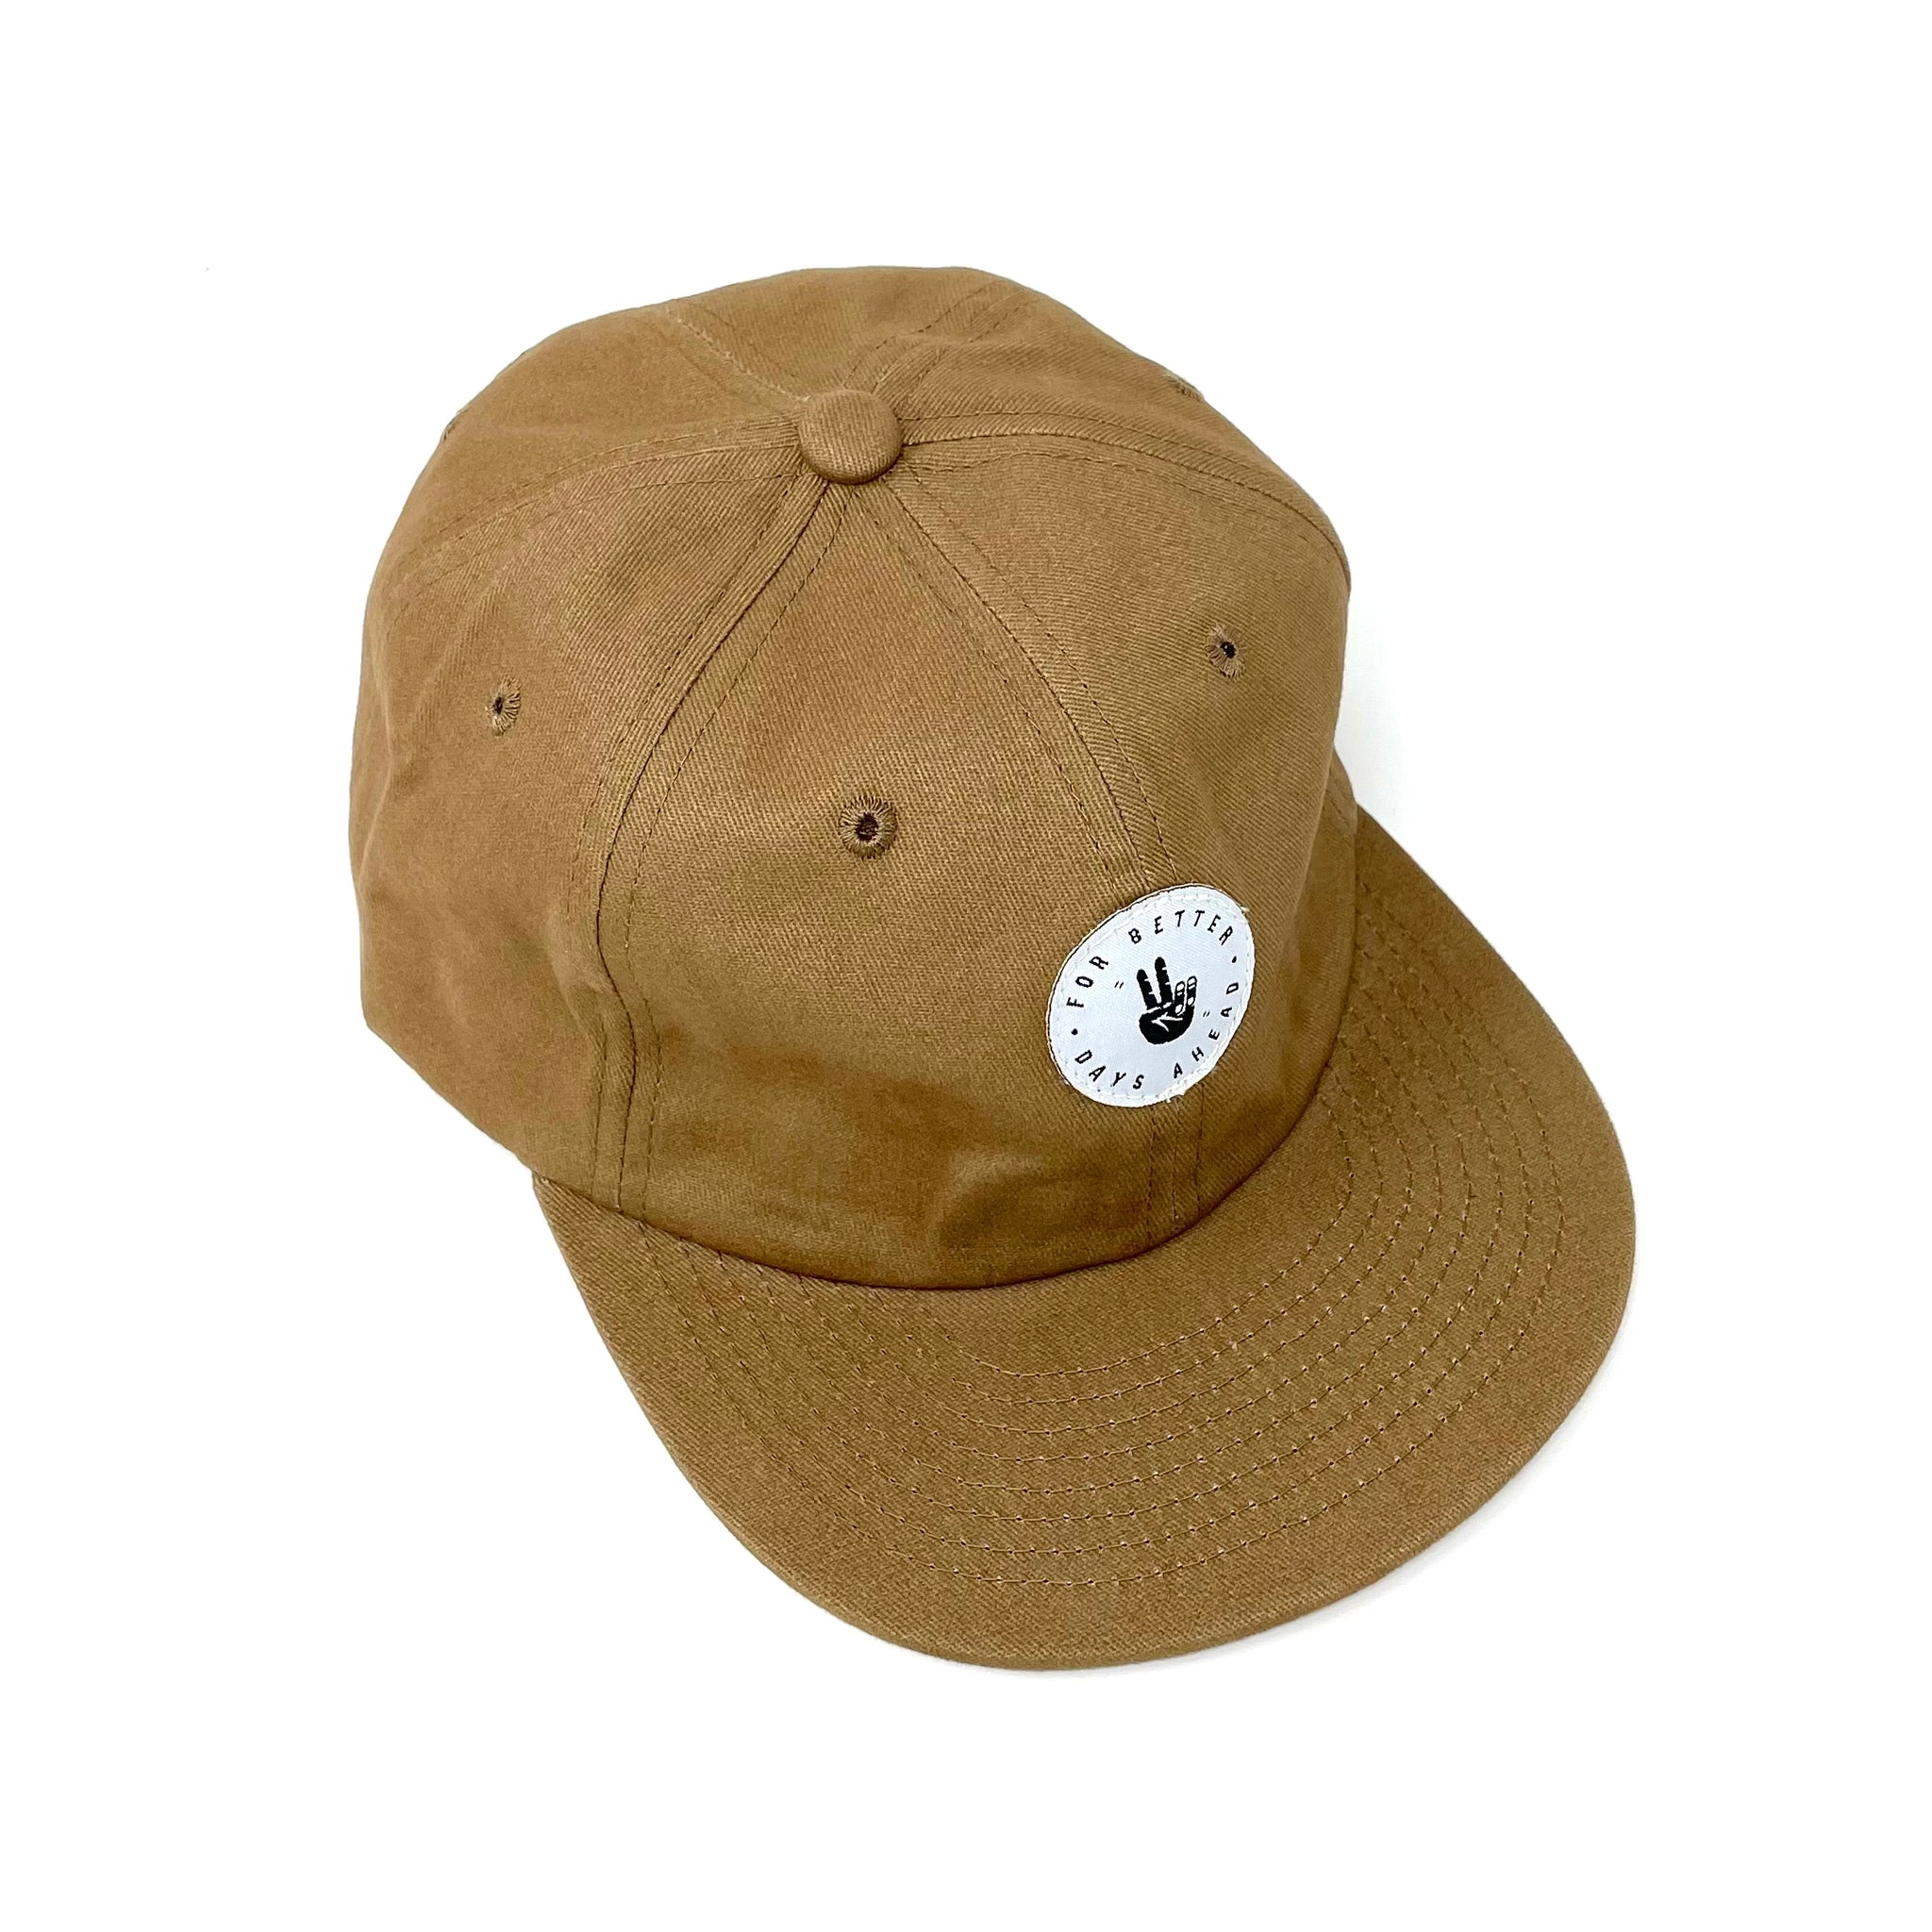 Better Days Ahead Hat